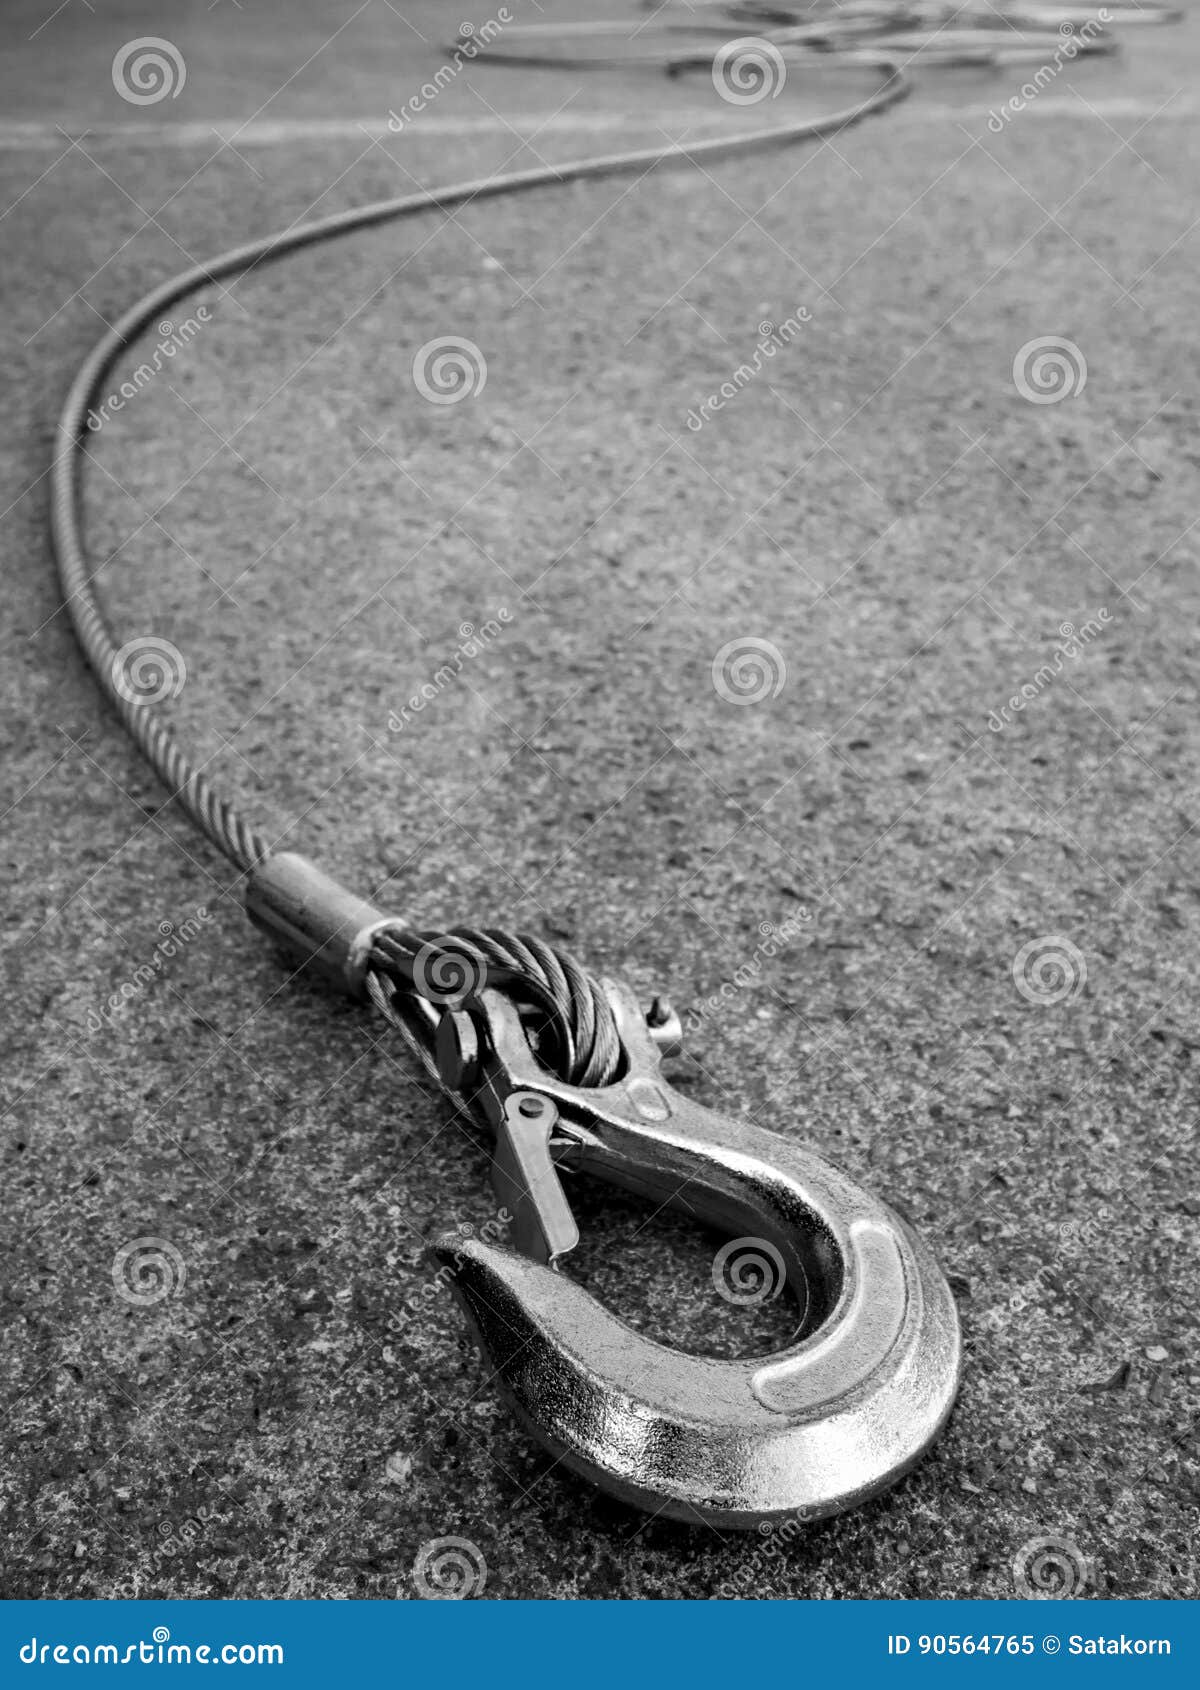 https://thumbs.dreamstime.com/z/wire-rope-cable-hook-install-winch-car-new-90564765.jpg